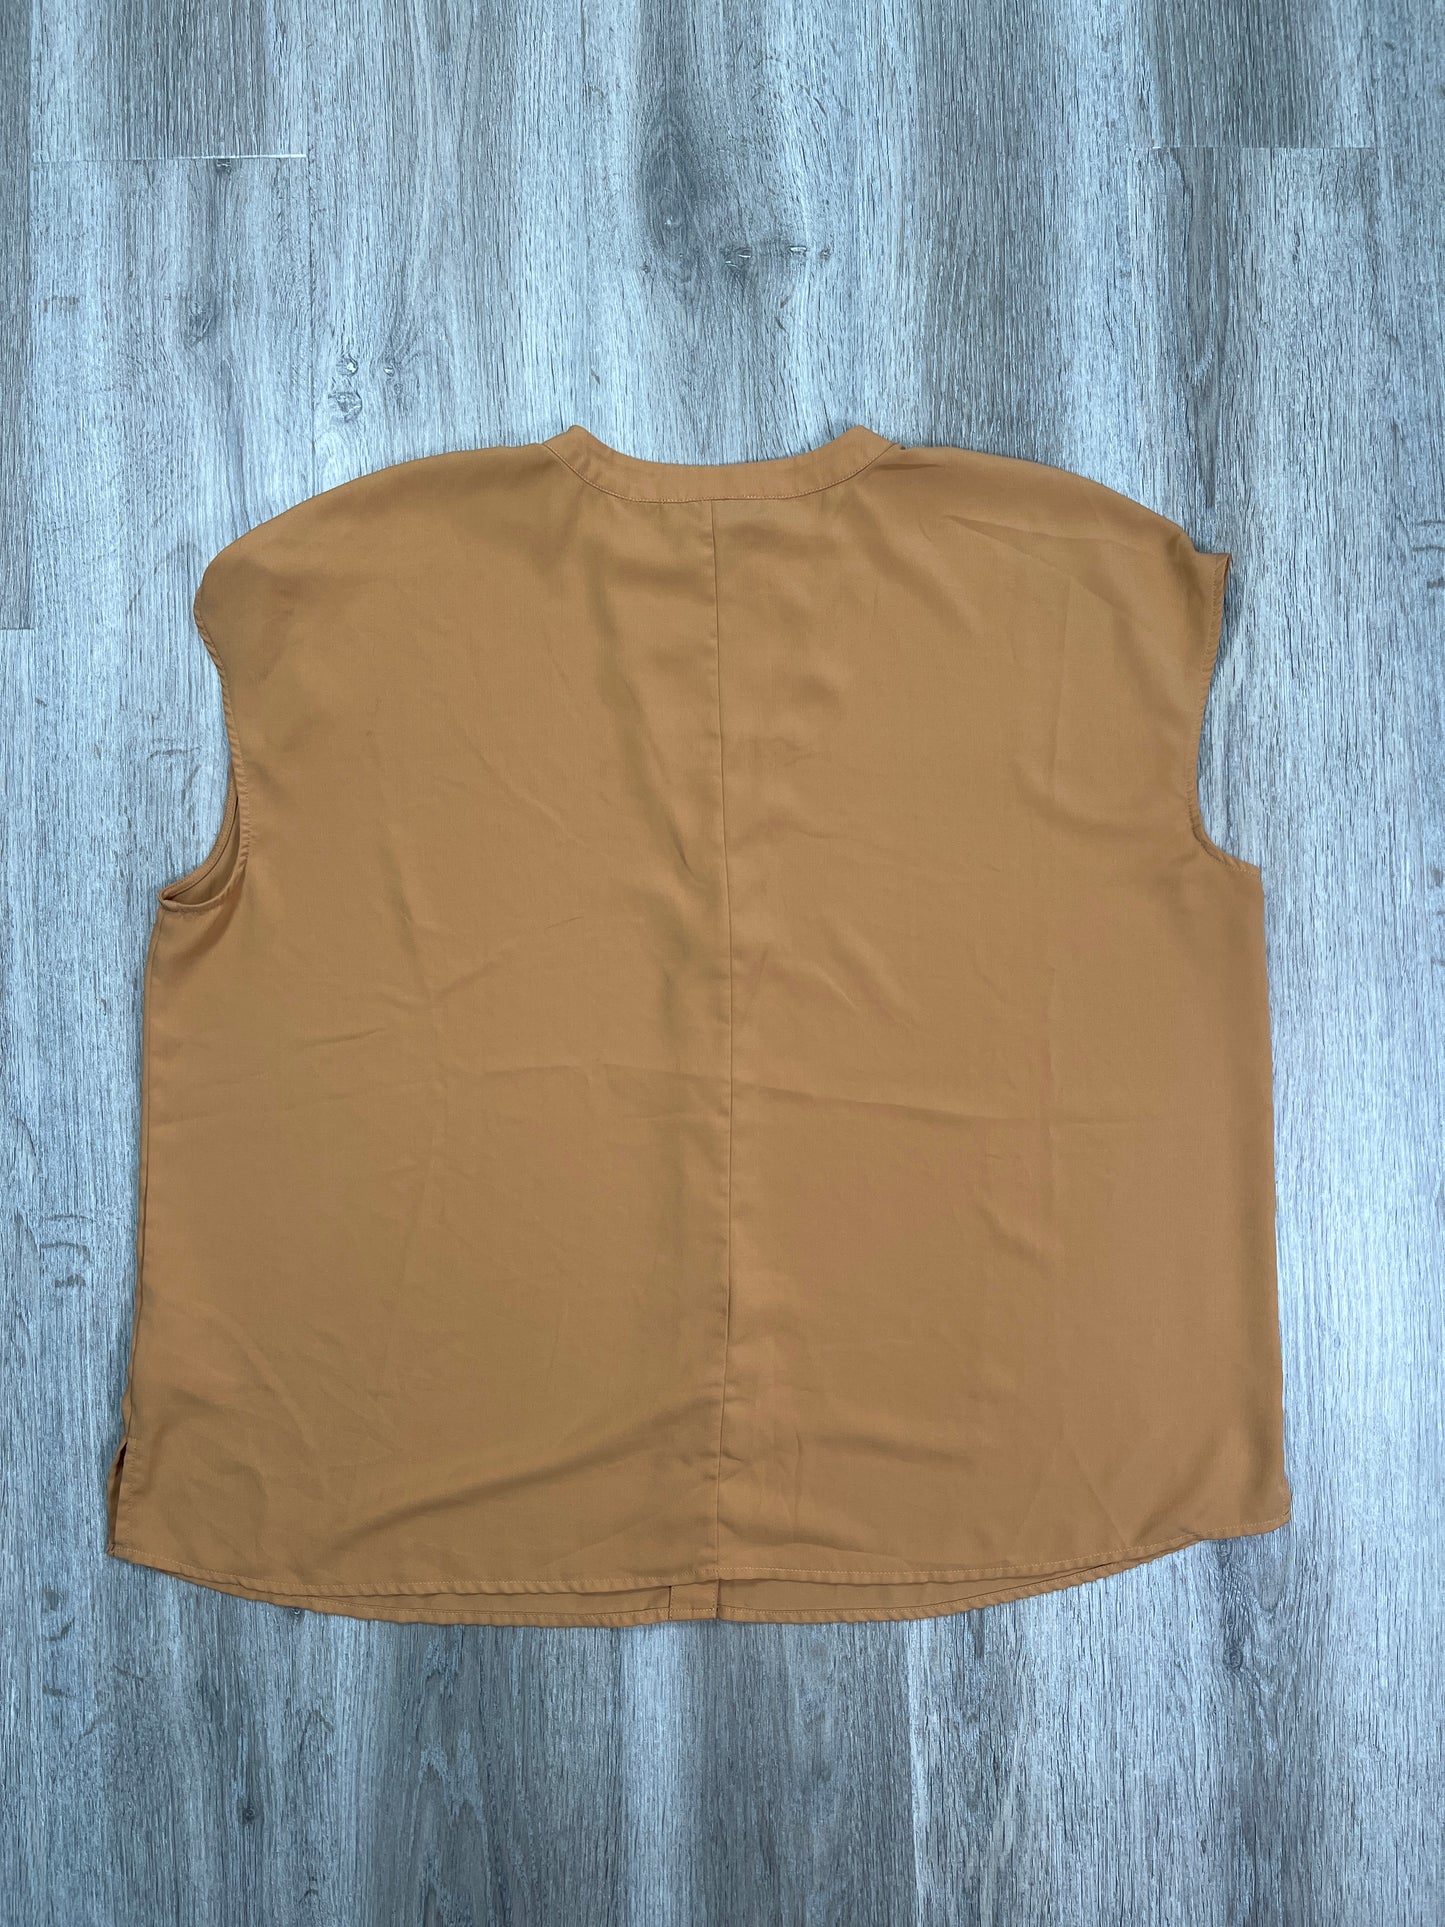 Top Short Sleeve By Eloquii  Size: 2x